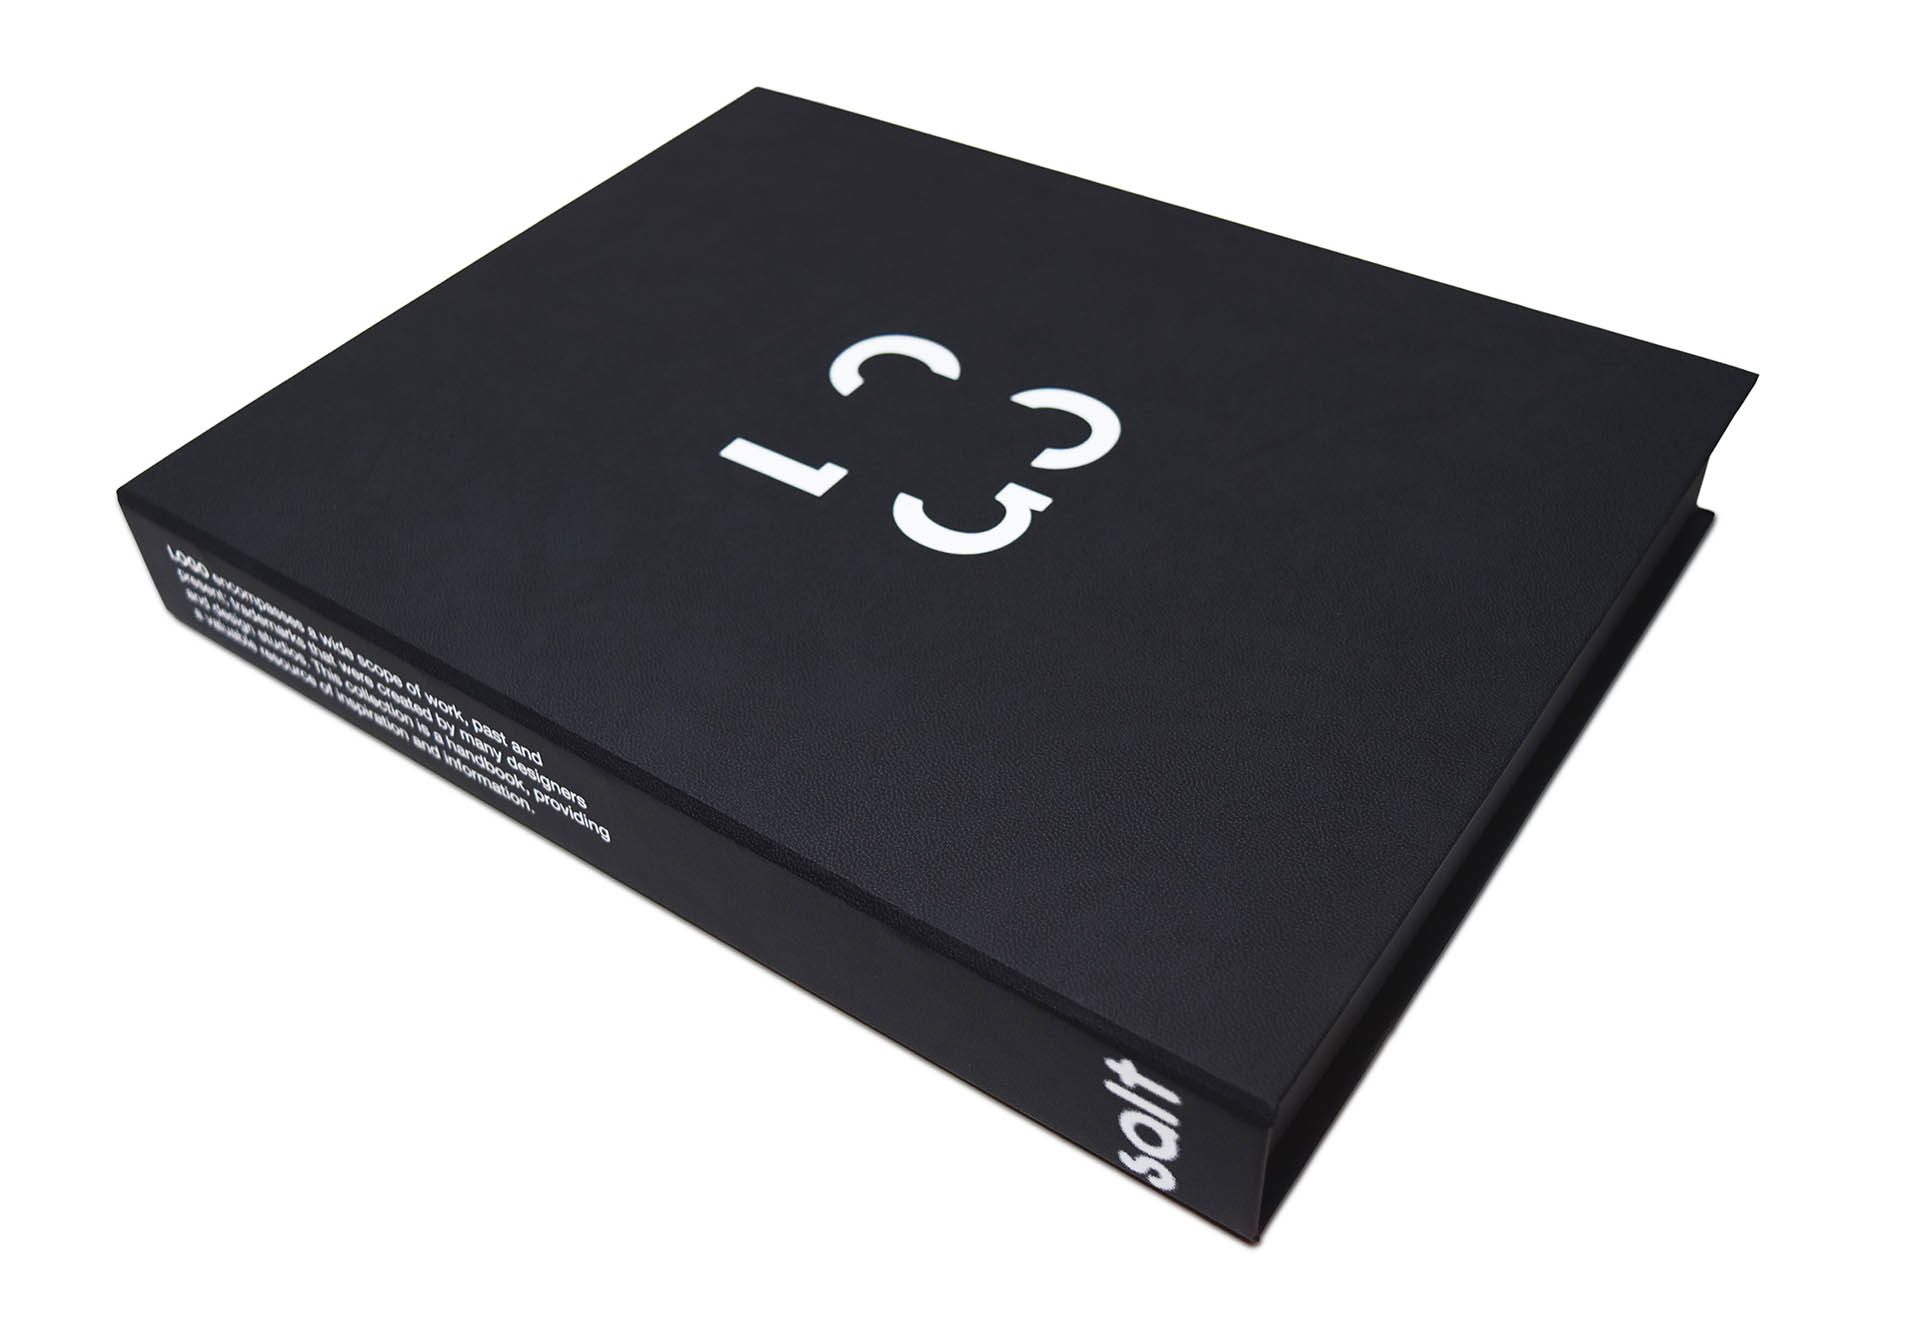 LOGO: a special edition collection of two volumes that include trademarks categorised based on certain criteria – the two volumes and an absorption filter are included inside the box